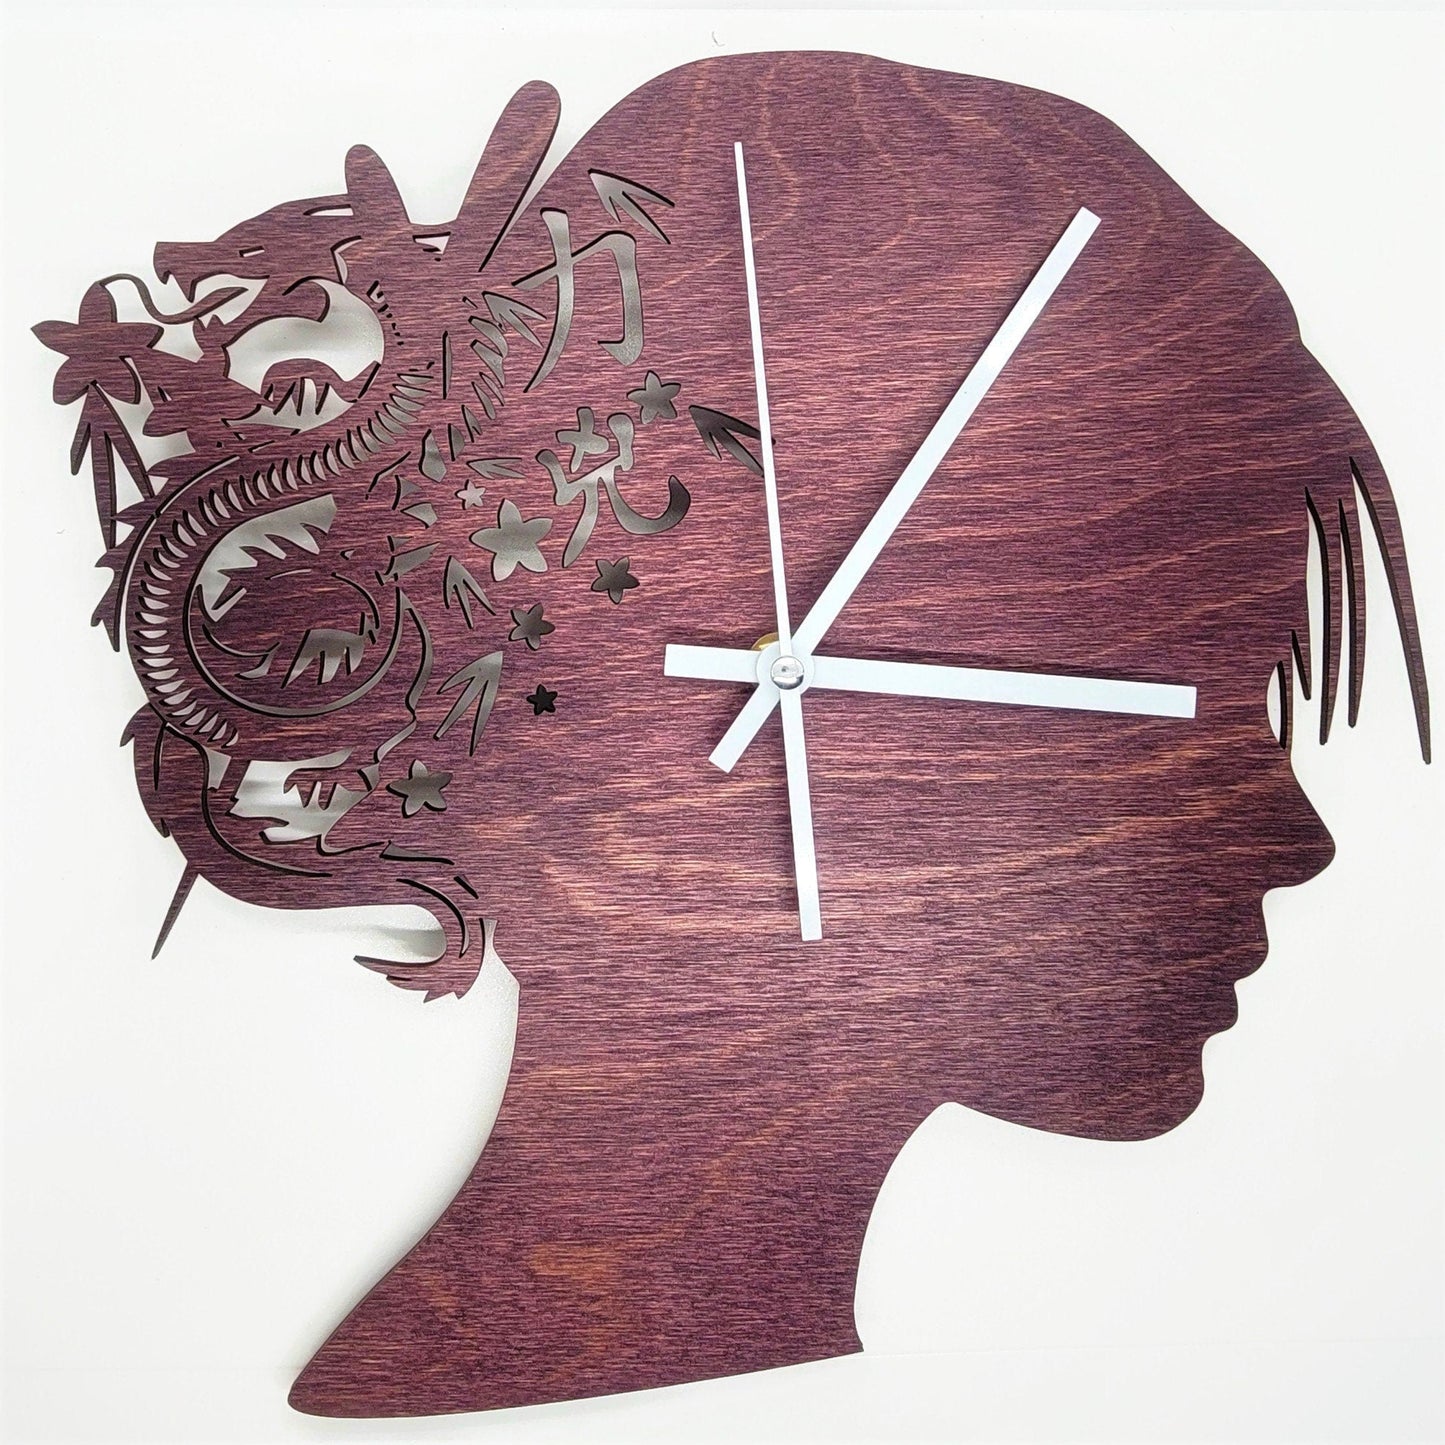 Woman and Dragon Silhouette Personalized Wall Clock